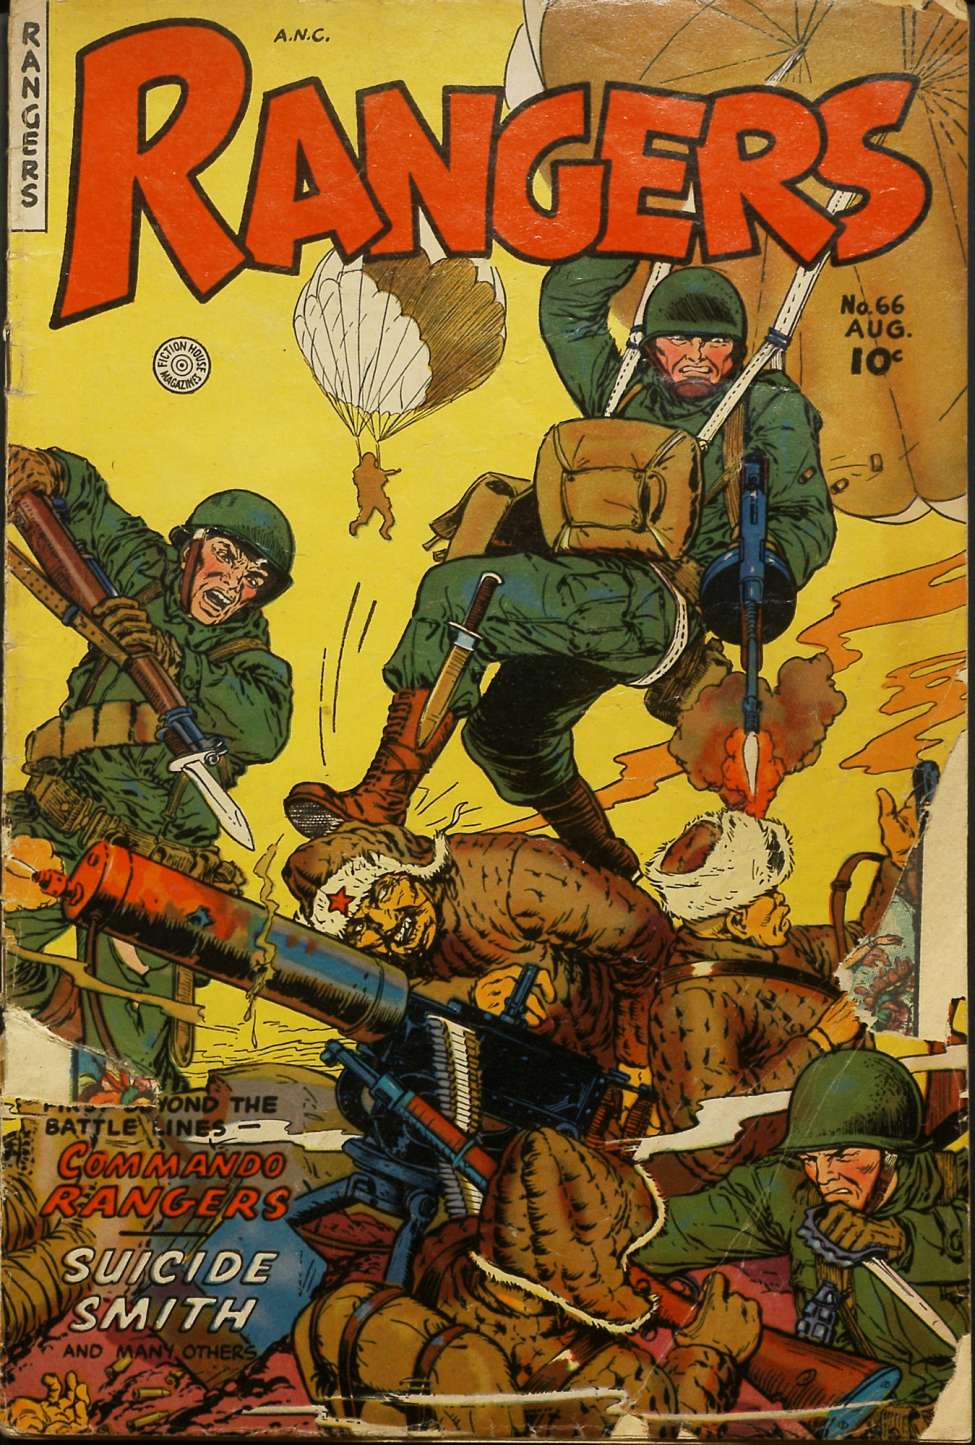 Comic Book Cover For Rangers Comics 66 - Version 1